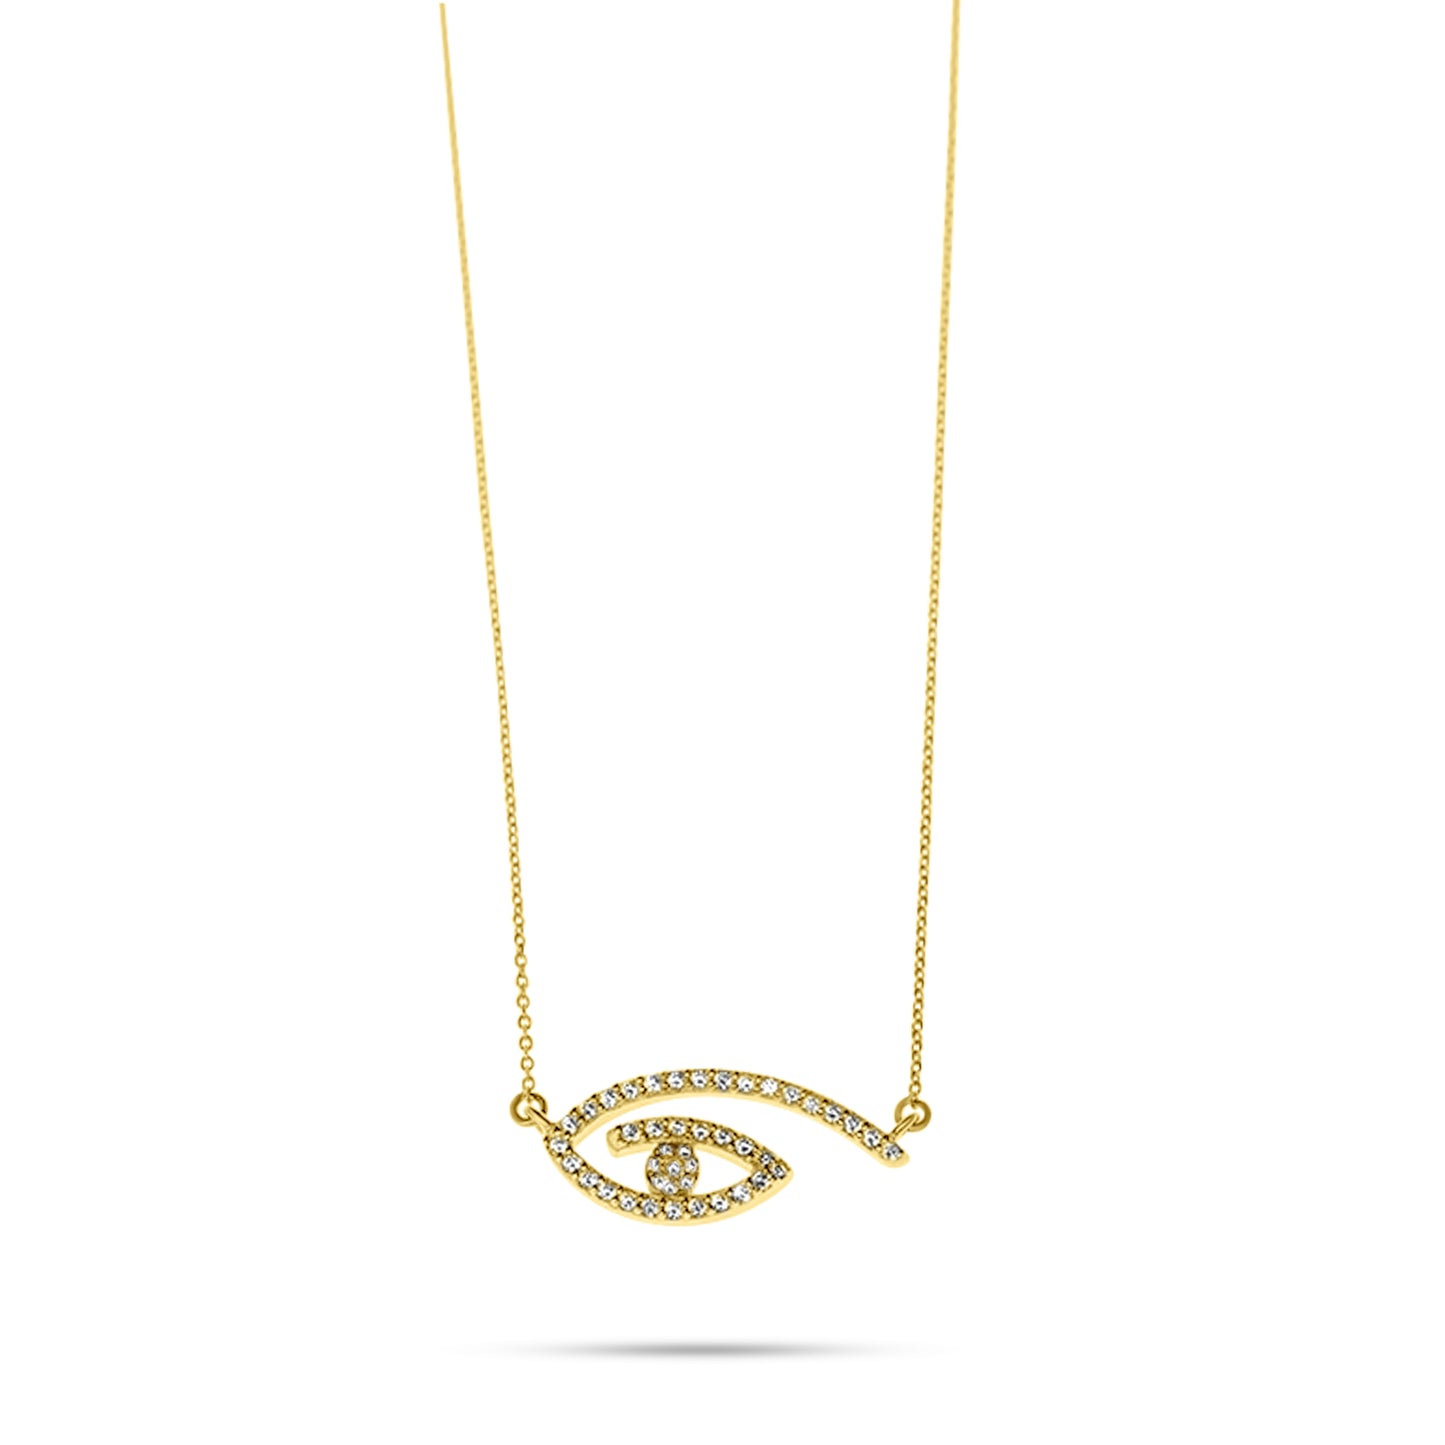 White Lucky Evil eyes - Gold plated